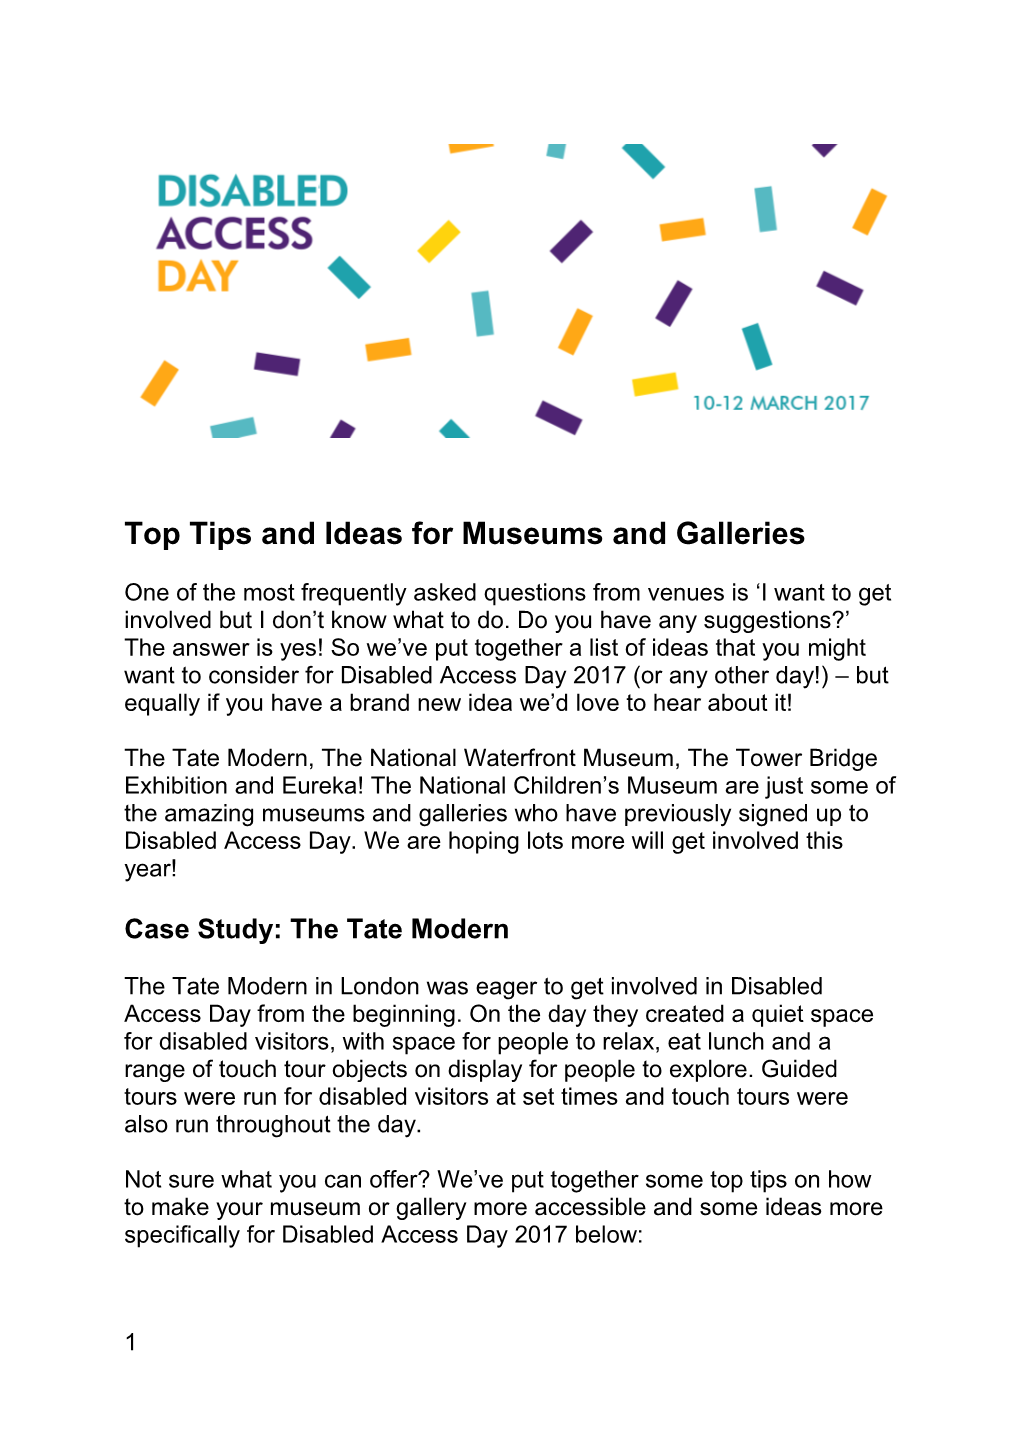 Top Tips and Ideas for Museums and Galleries